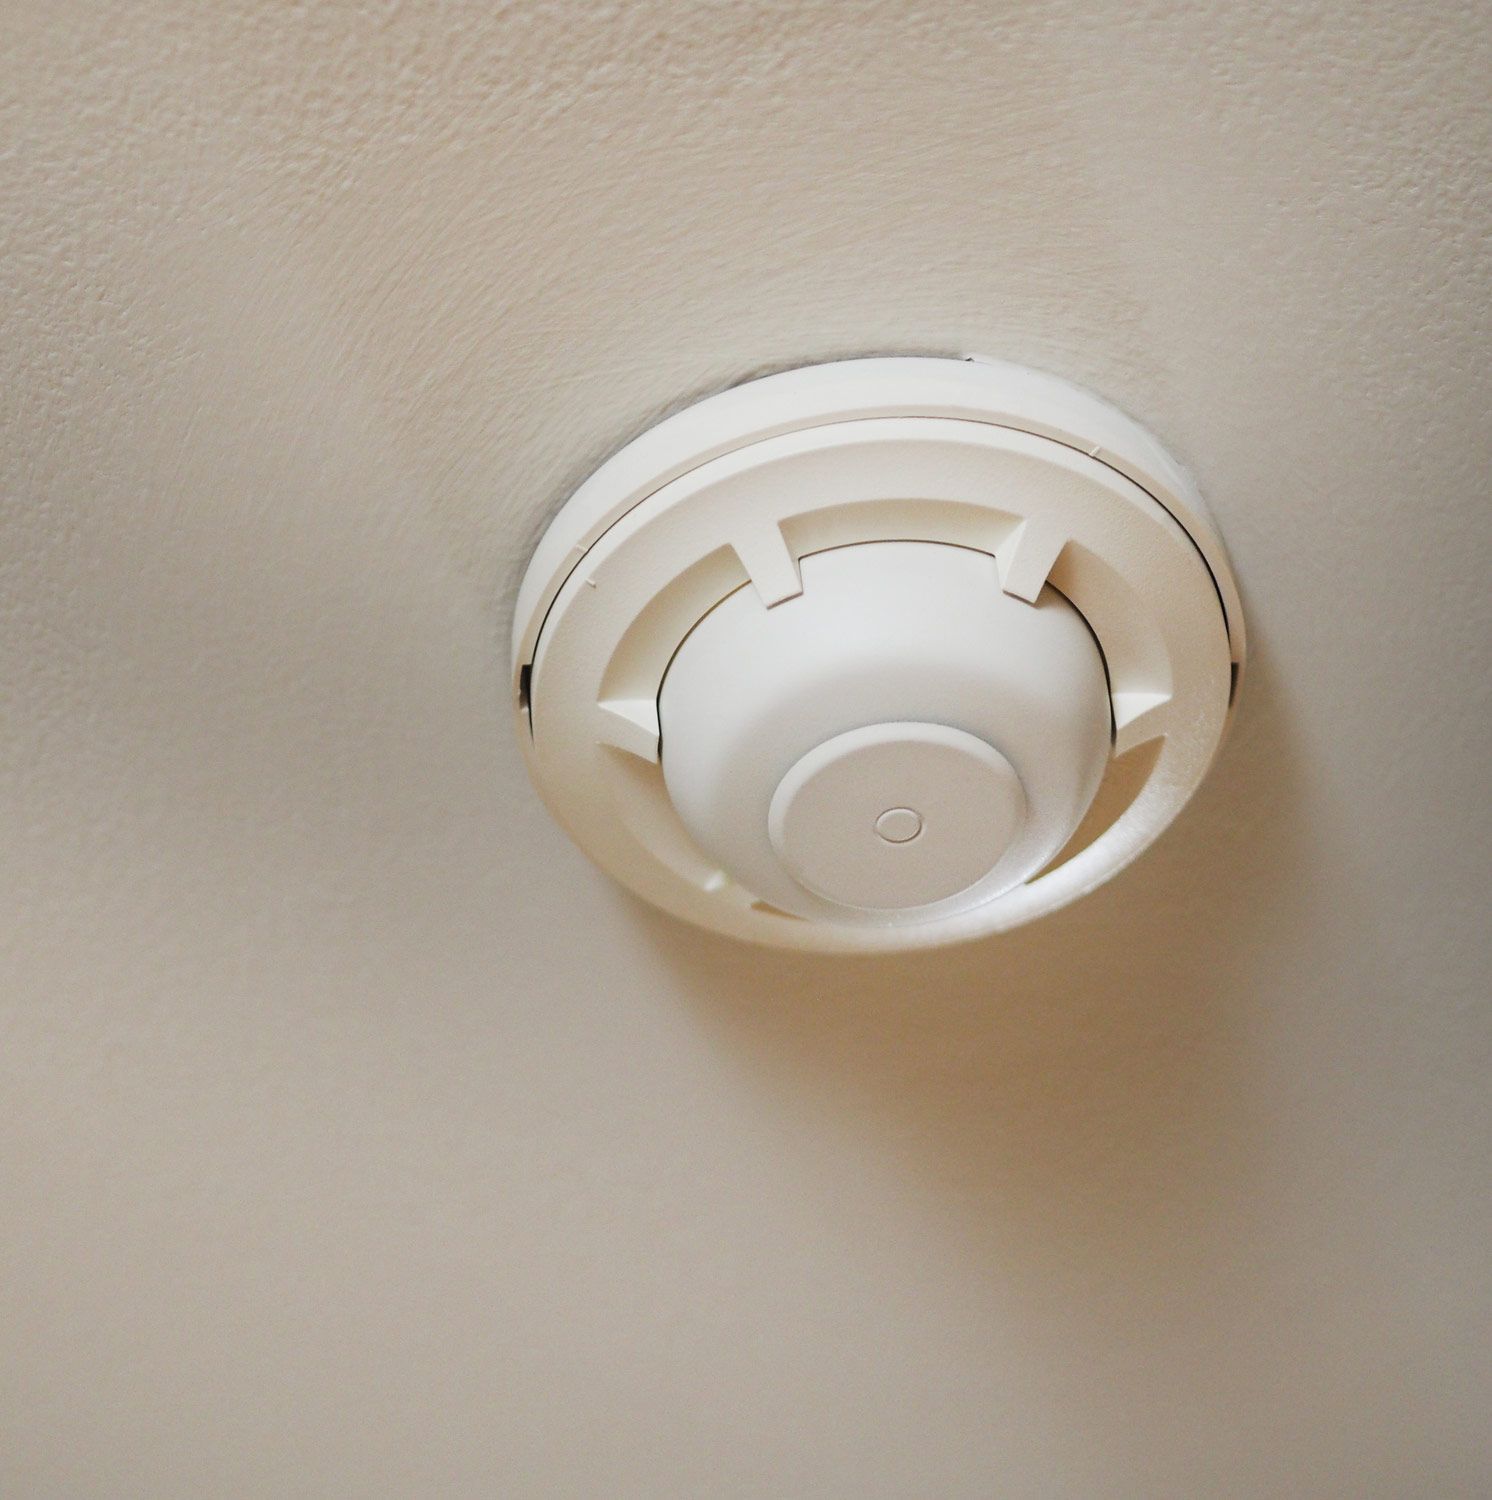 Smoke detector on the ceiling | Sydney, NSW | TEC Security